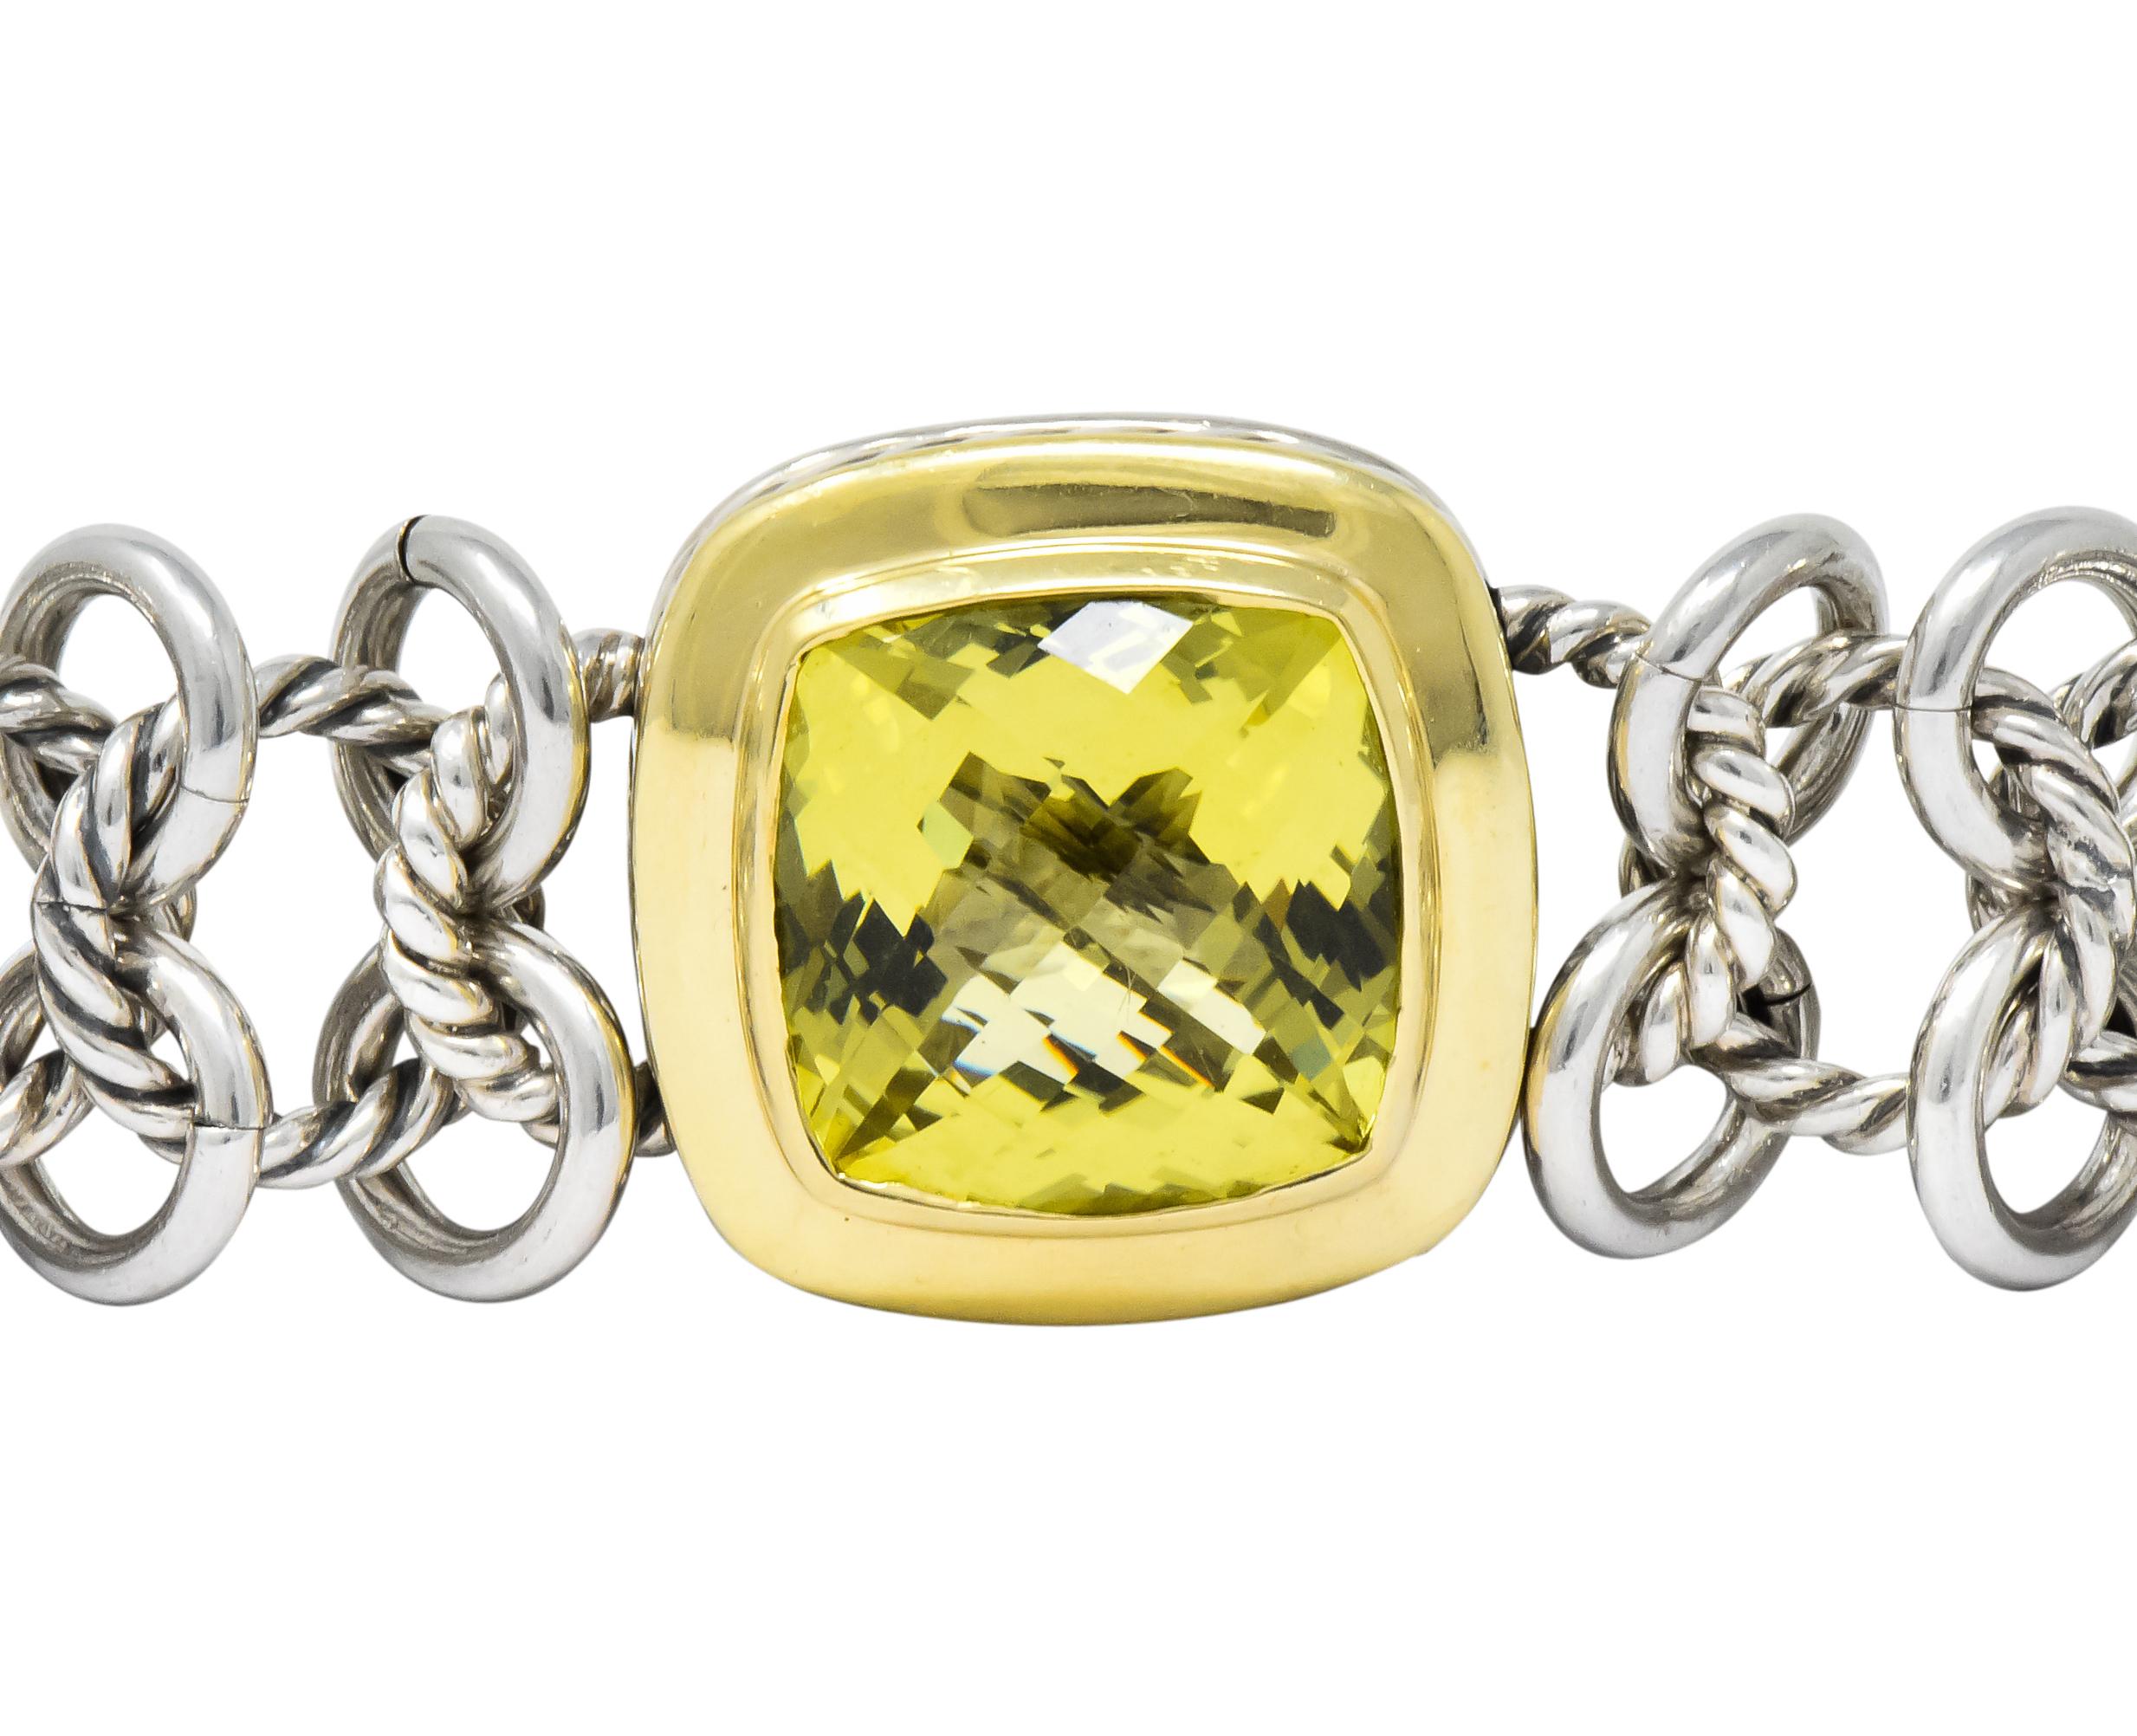 Centering a mixed cushion cut quartz measuring approximately 14 mm x 14 mm, vivid yellowish-green in color

Bezel set in an 18 karat gold surround with sterling silver cable motif profile

Flanked by bracelet made of round polished and twisted cable